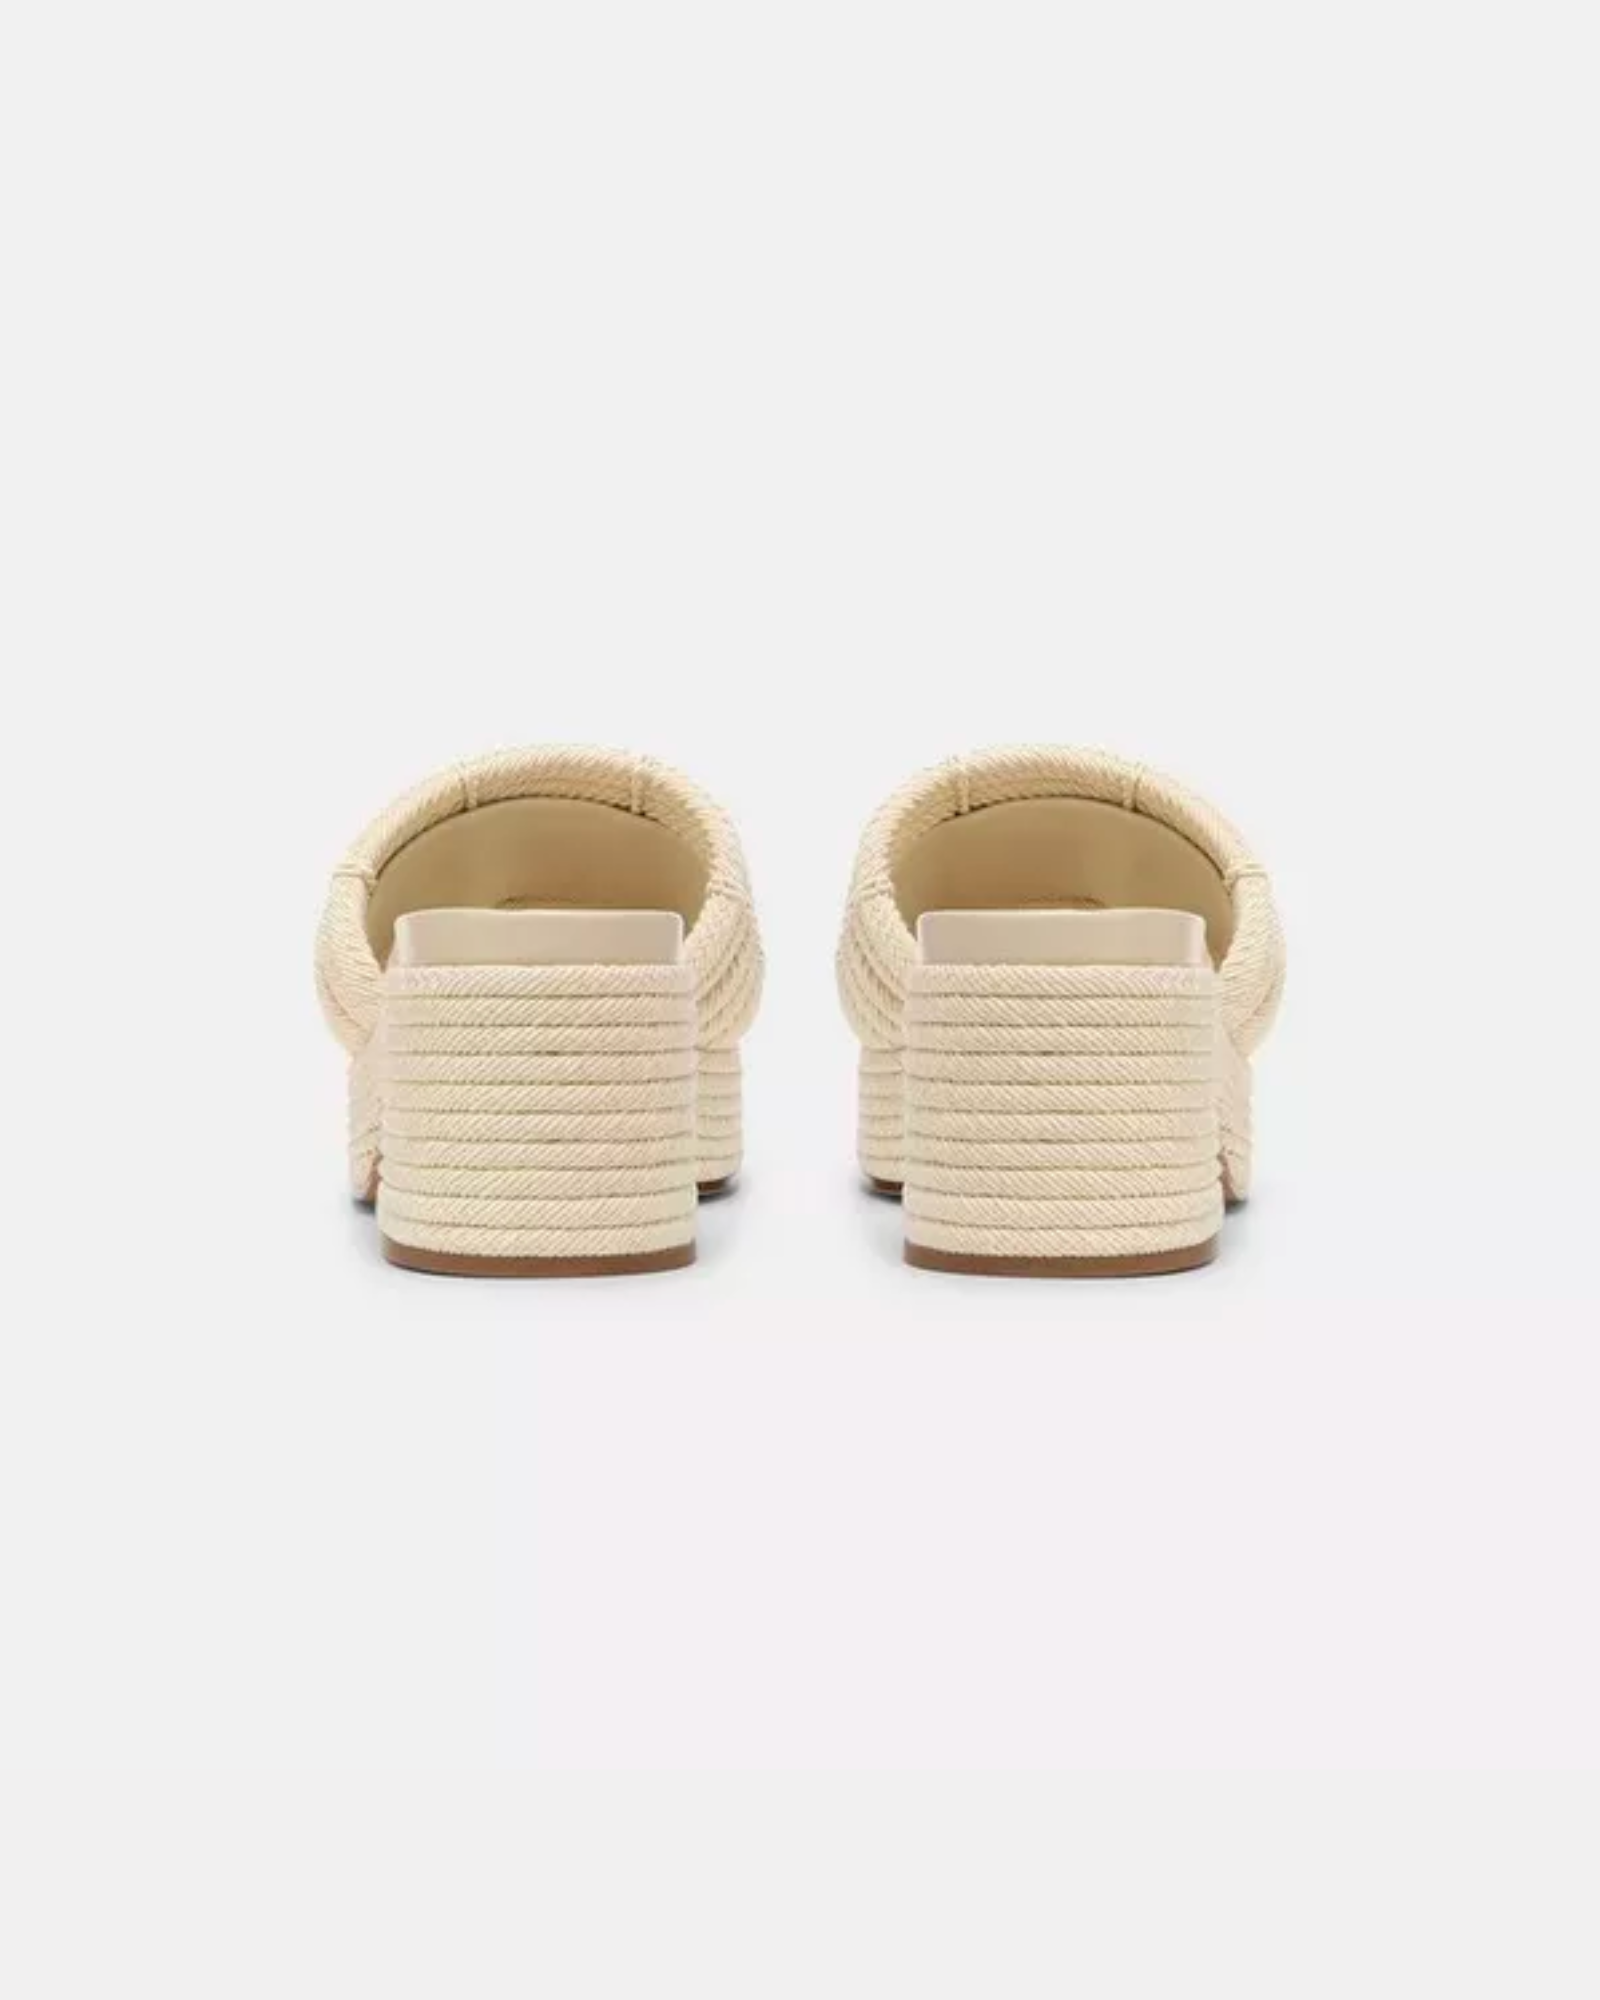 Vince Margo Cord Sandal in Marble Cream